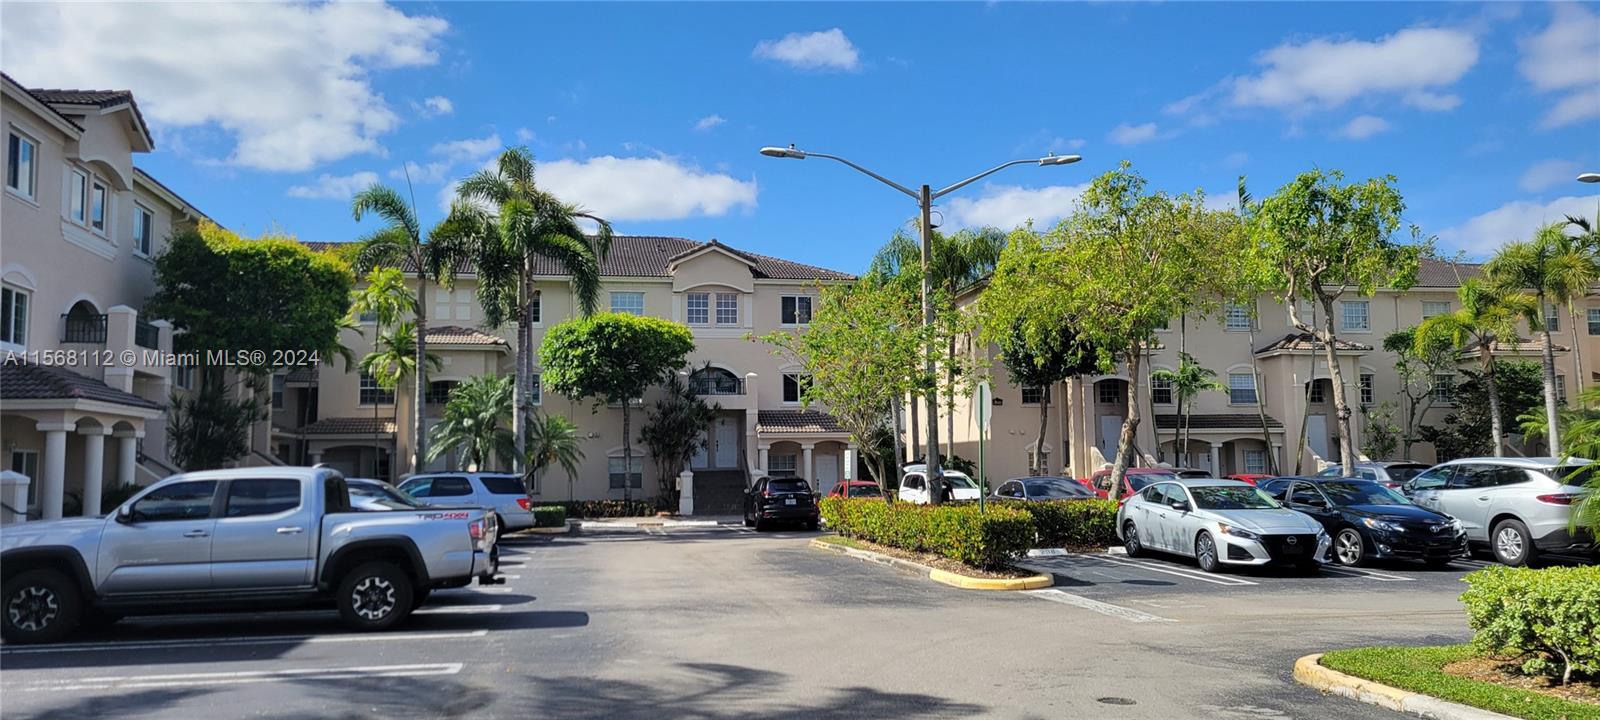 5640 NW 115th Ct #211 For Sale A11568112, FL